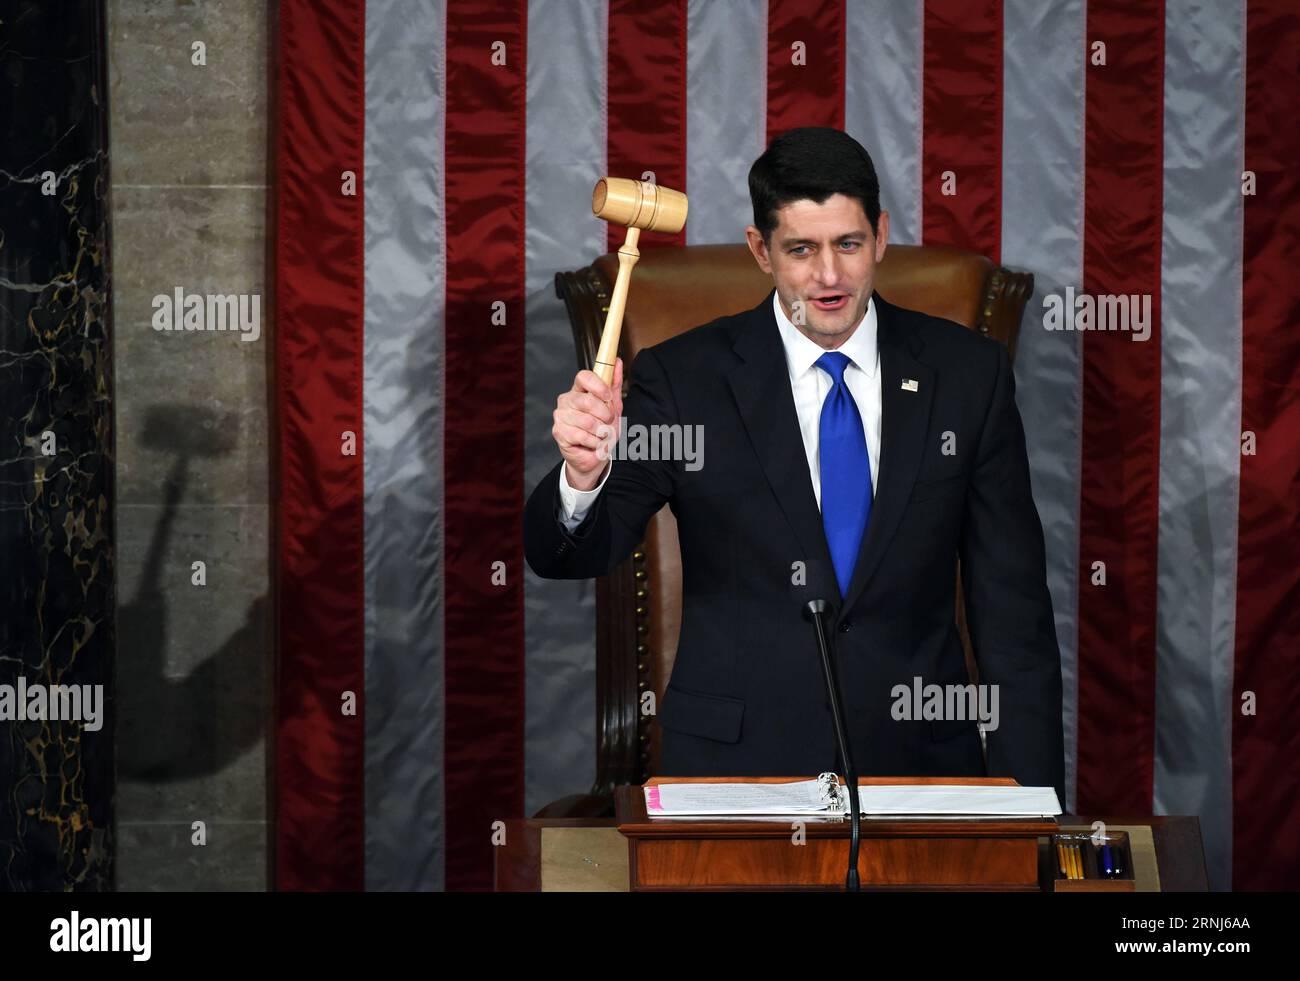 (170103) -- WASHINGTON, Jan. 3, 2017 -- Paul Ryan raises the gavel after being re-elected as House Speaker during the opening of the 115th U.S. Congress on Capitol Hill in Washington D.C., the United States, on Jan. 3, 2017. The 115th U.S. Congress convenes on Tuesday with Republican Paul Ryan re-elected as House Speaker as expected while outgoing Vice President Joe Biden presides over the old Senate chamber for the last time. ) U.S.-WASHINGTON D.C.-HOUSE SPEAKER-PAUL RYAN YinxBogu PUBLICATIONxNOTxINxCHN   Washington Jan 3 2017 Paul Ryan raises The gavel After Being right Elected As House Spea Stock Photo